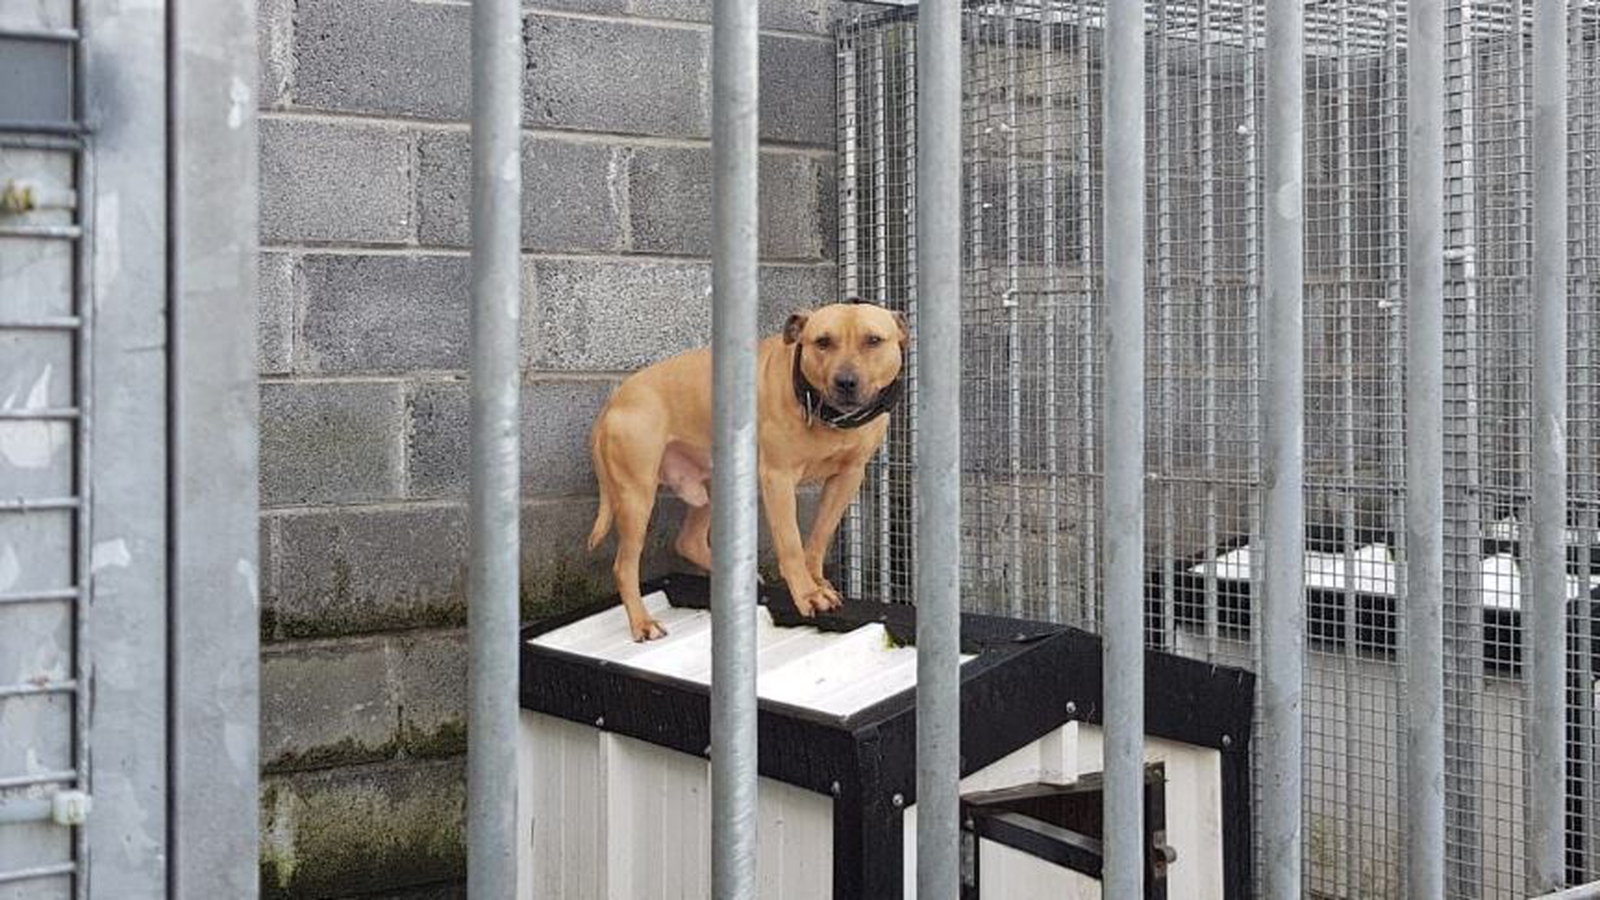 Six dogs seized in restricted breeds operation in Sligo